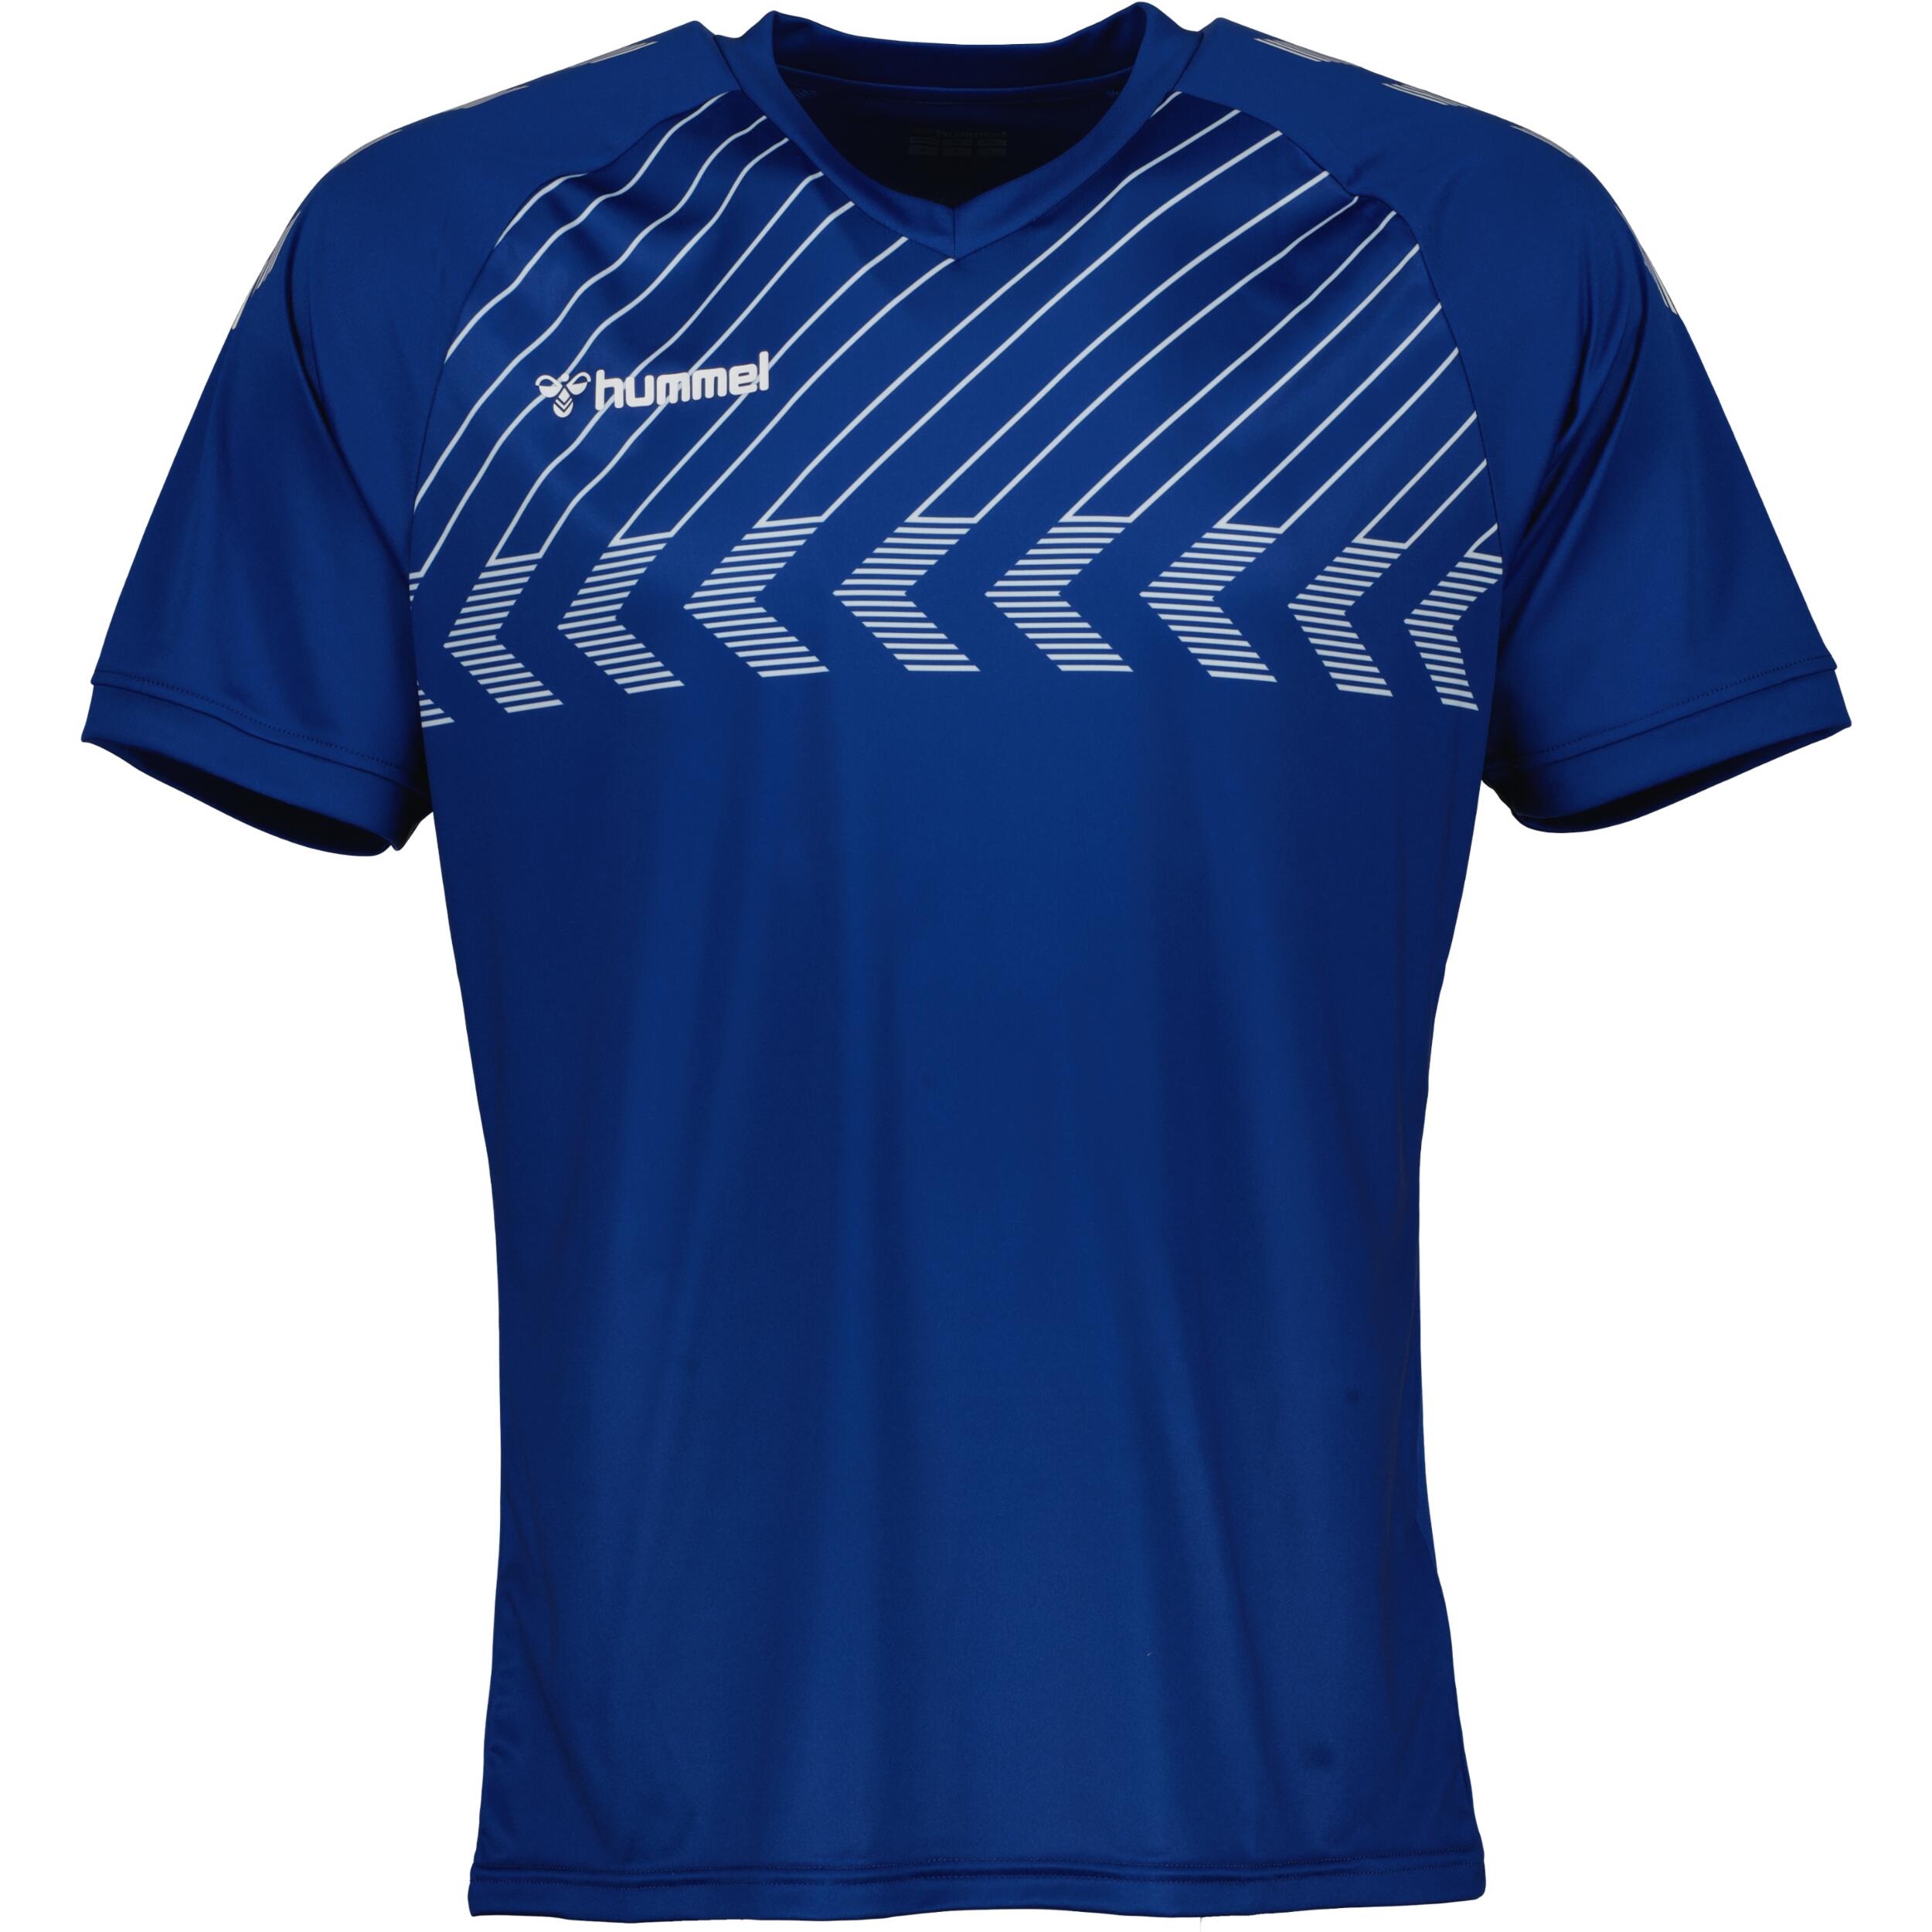 Poly jersey for men, great for football, in true blue 1/3